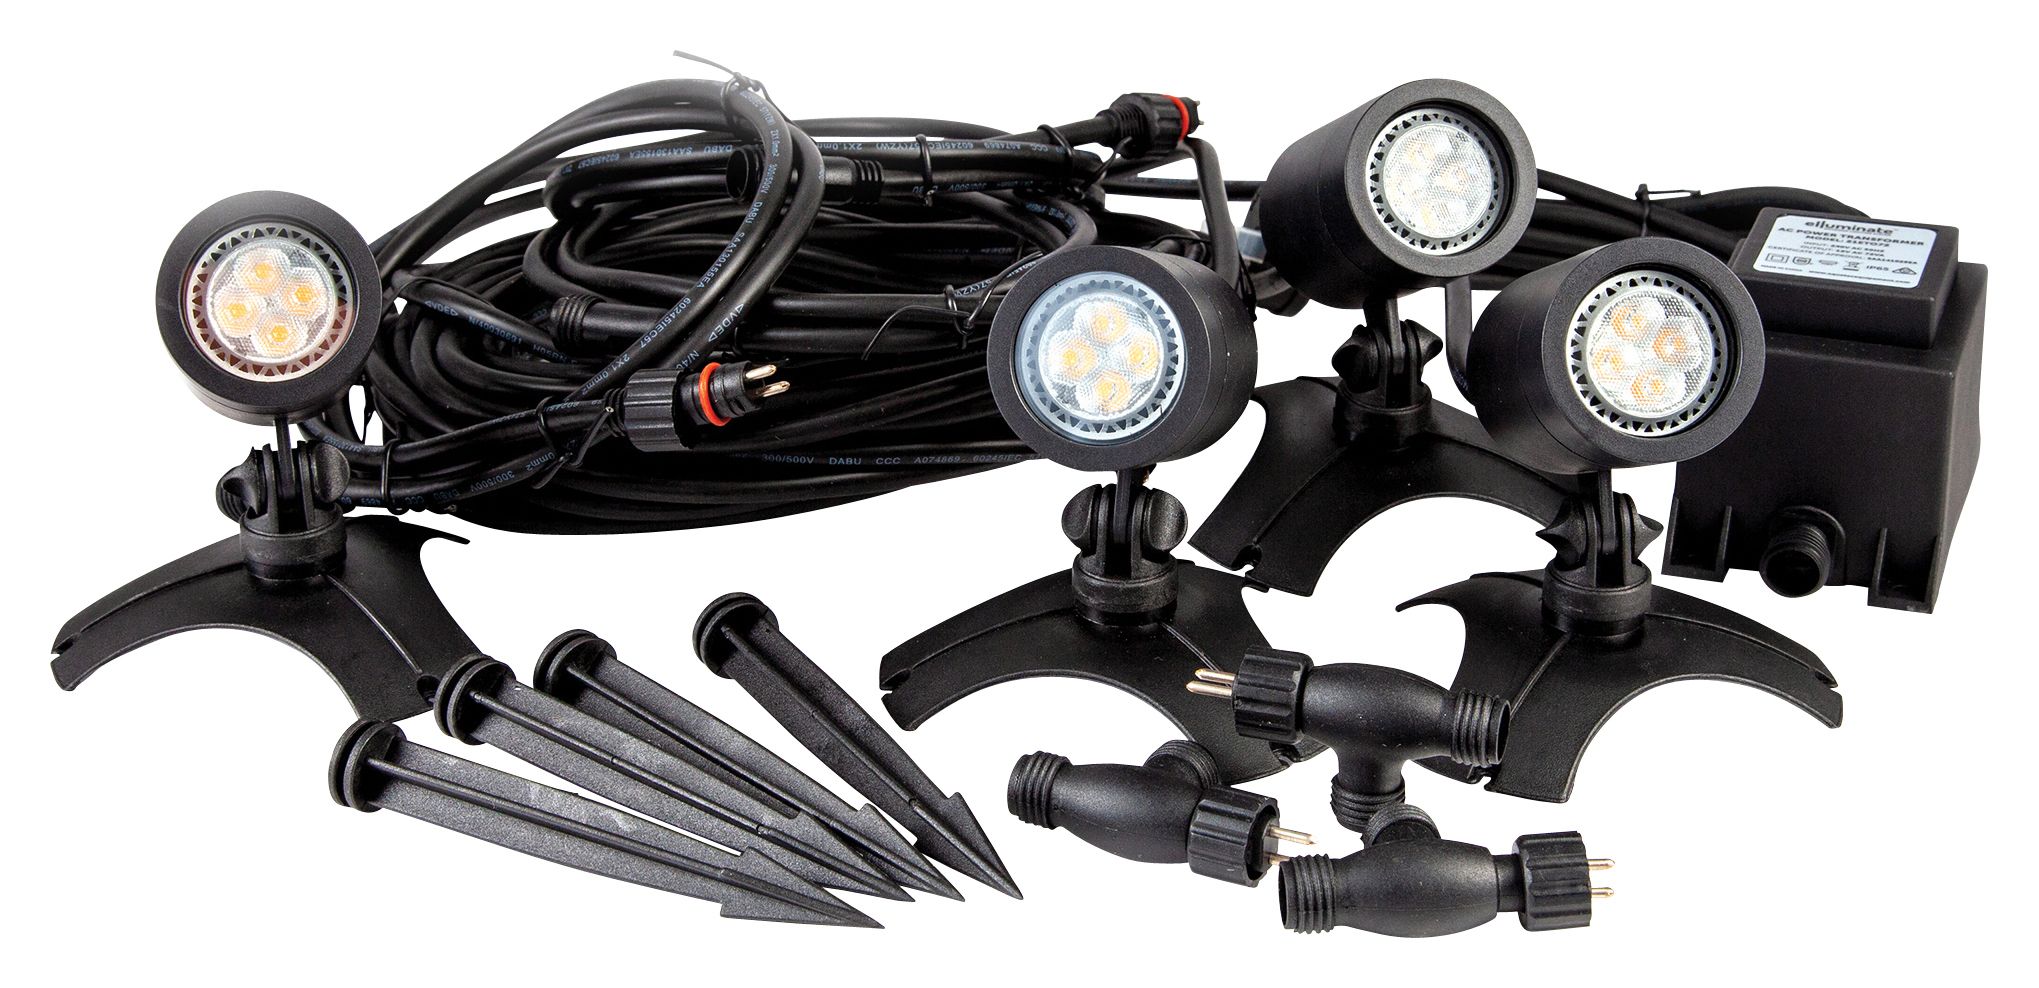 Image of Ellumiere Black Outdoor Low Voltage LED Small Spotlight Starter Kit 2W 4 Pack